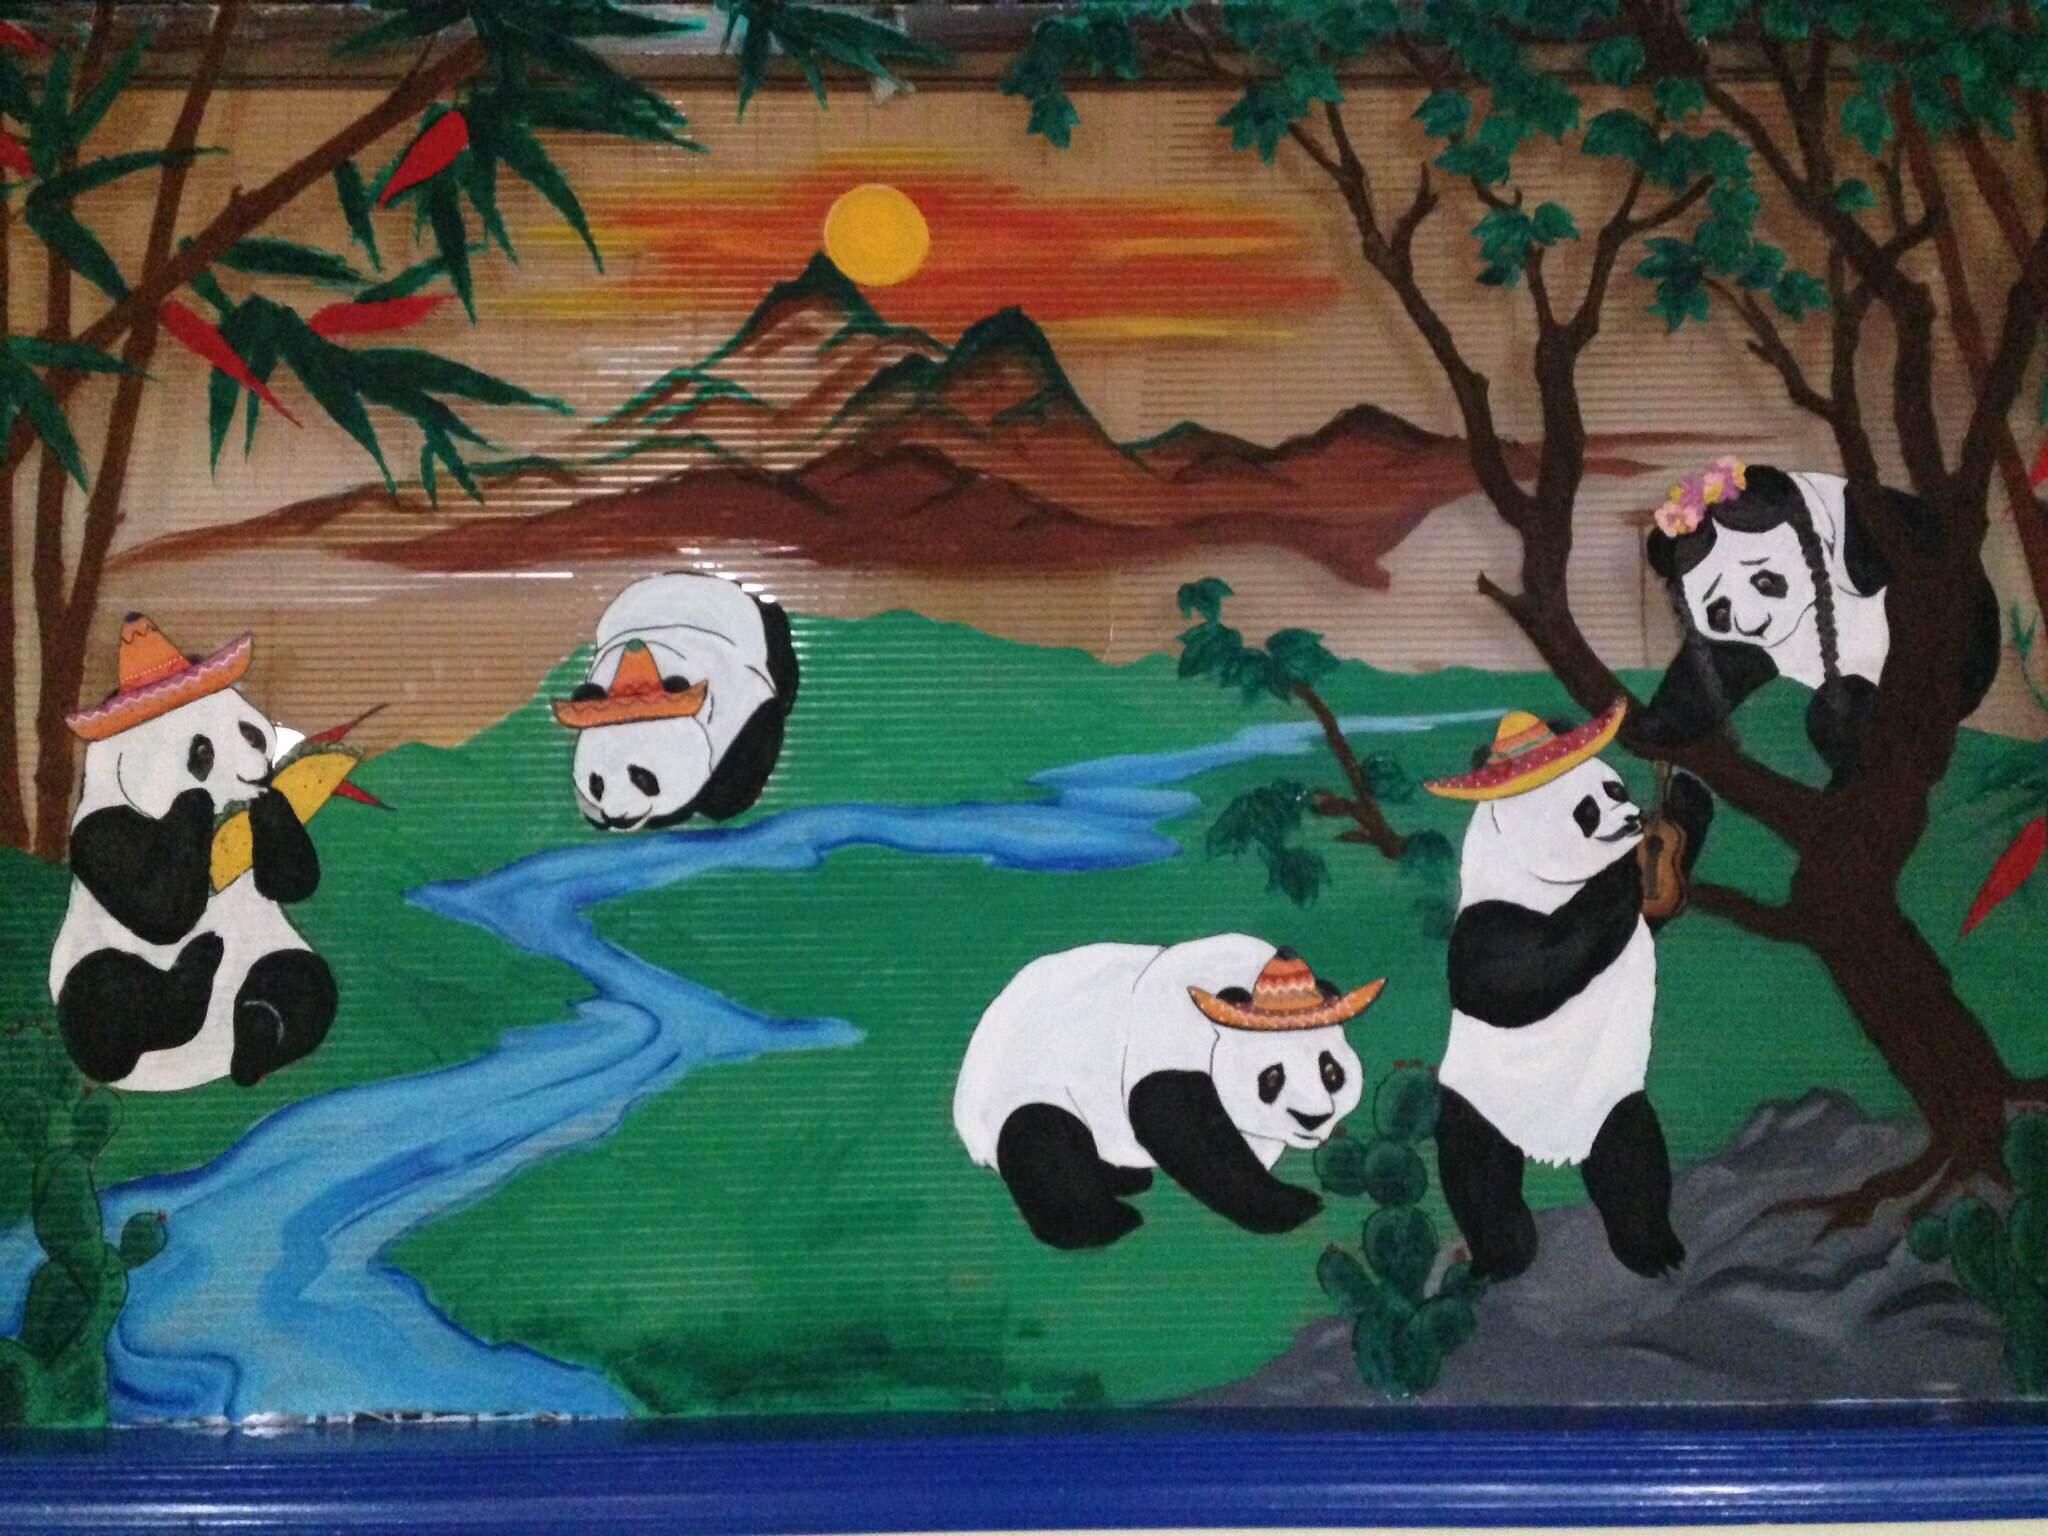 This Mexican restaurant used to be a Chinese restaurant so instead of painting over the pandas they just put sombreros on them